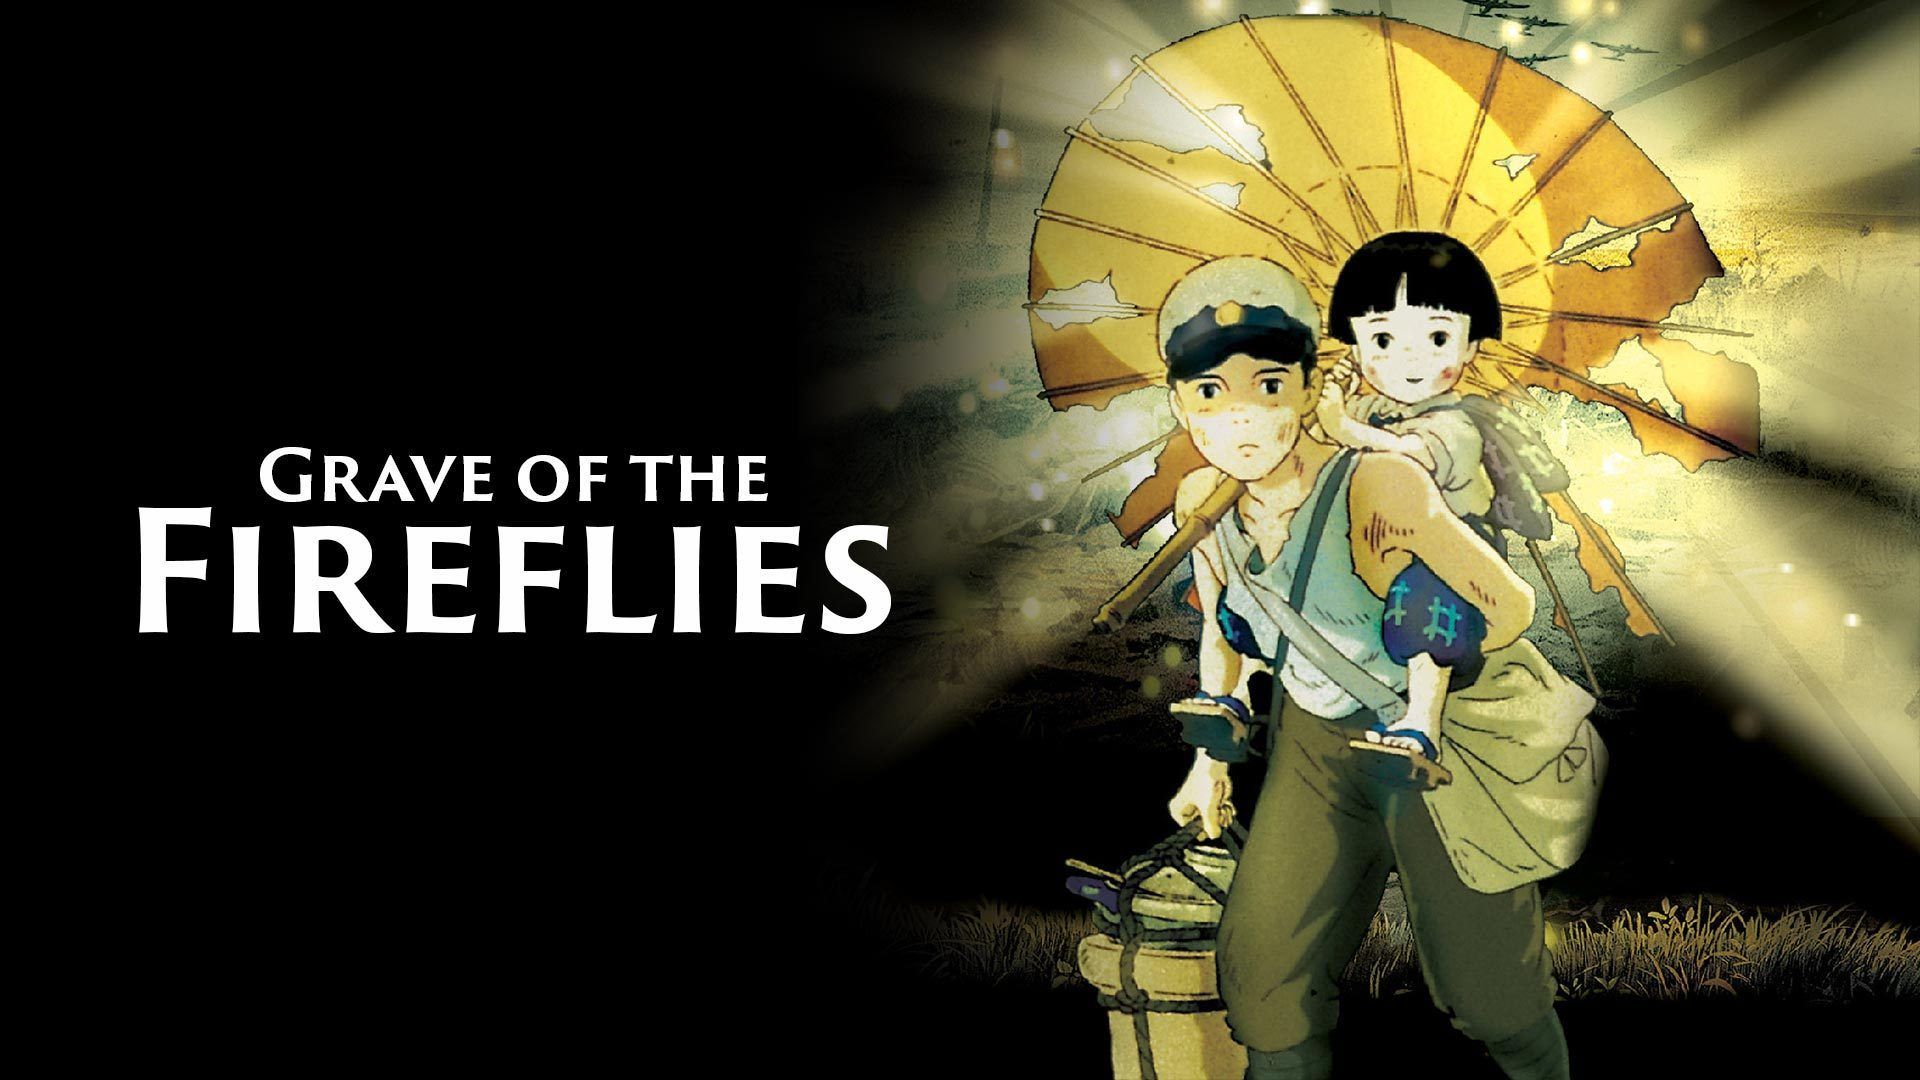 Great 1988 anime Grave of the Fireflies screens at 28 Bay Area theaters